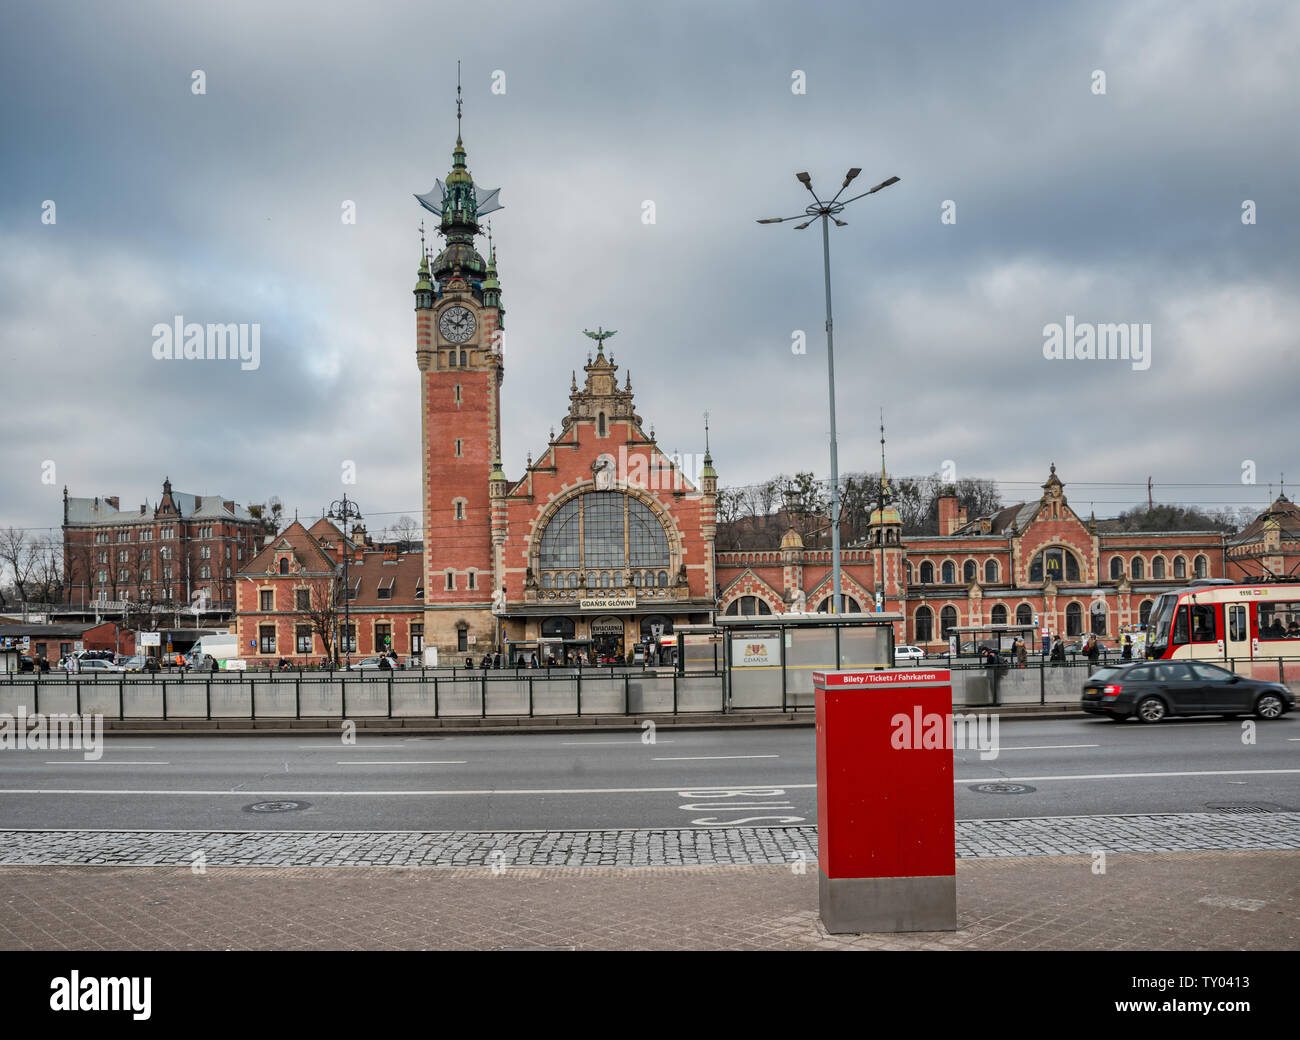 Gdansk, Poland – Feb 14, 2019: View at historic late 19th century main railway station buildings in Gdansk, Poland. Stock Photo